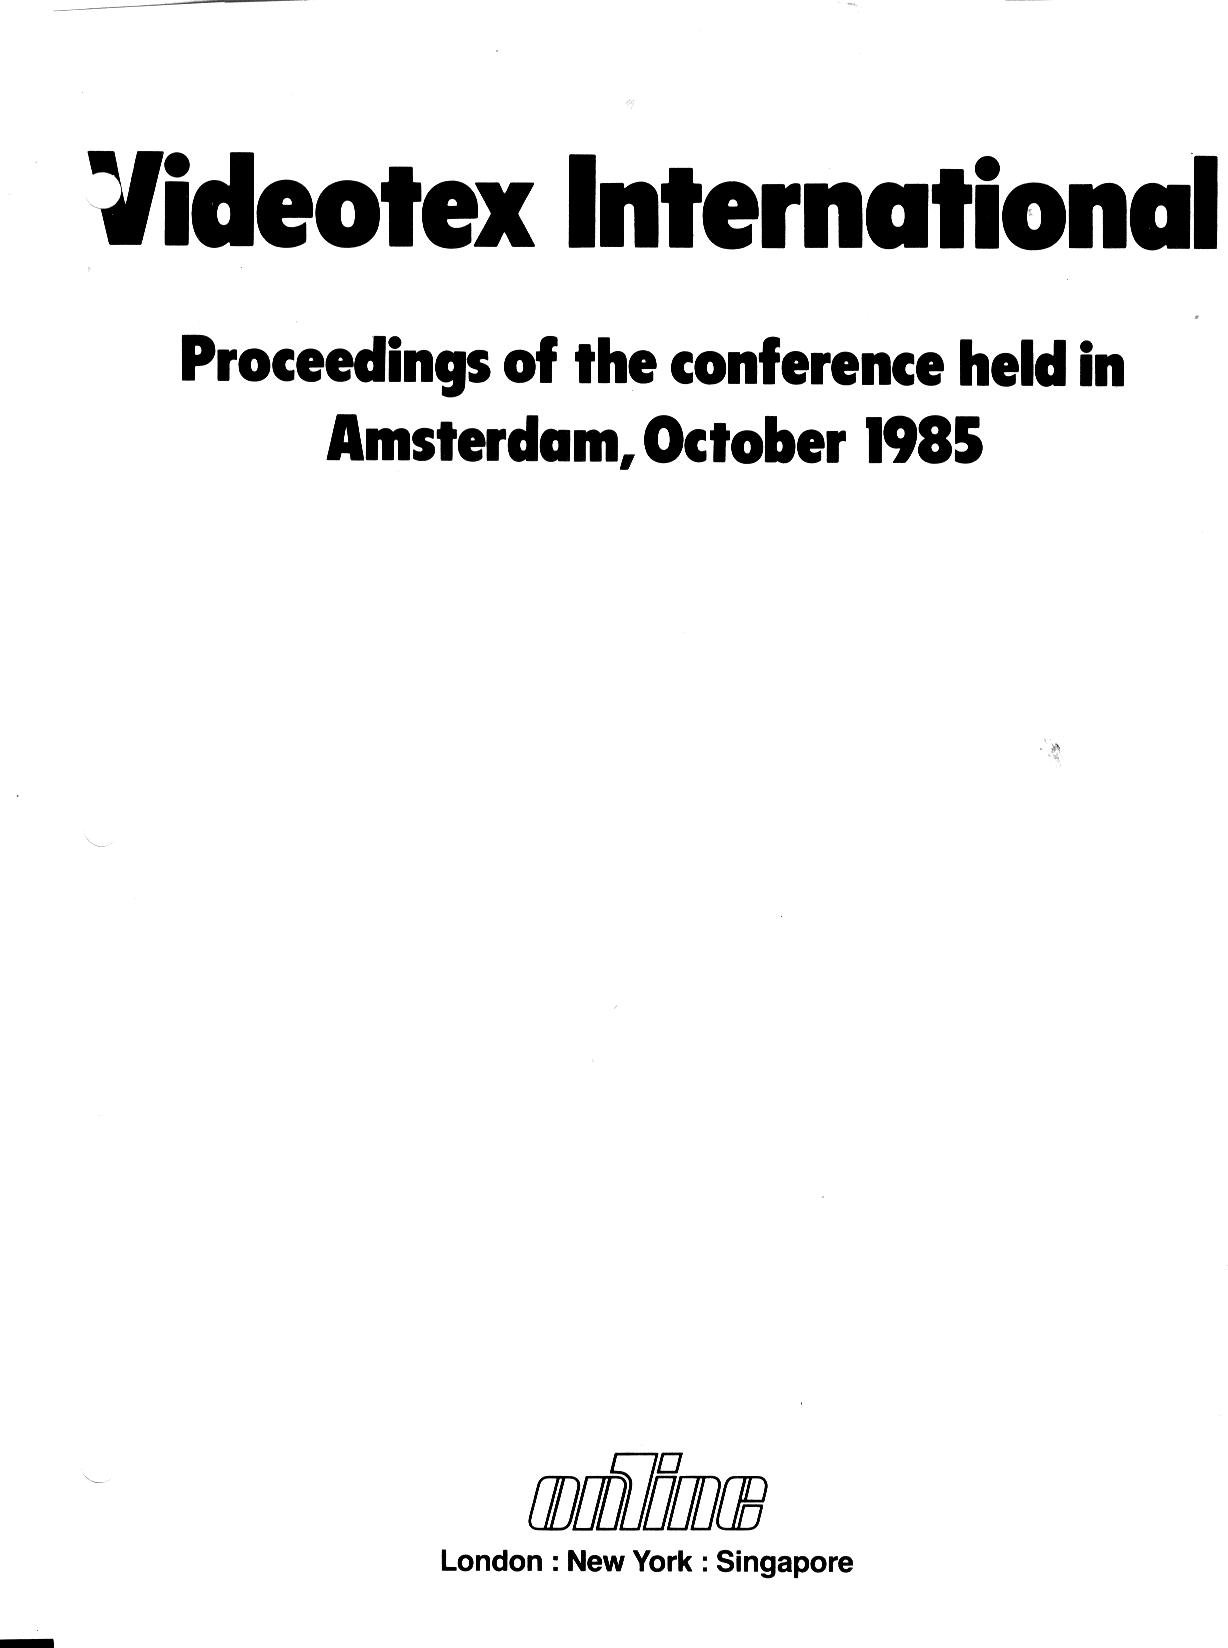 Videotex International '85 Conference Proceedings cover